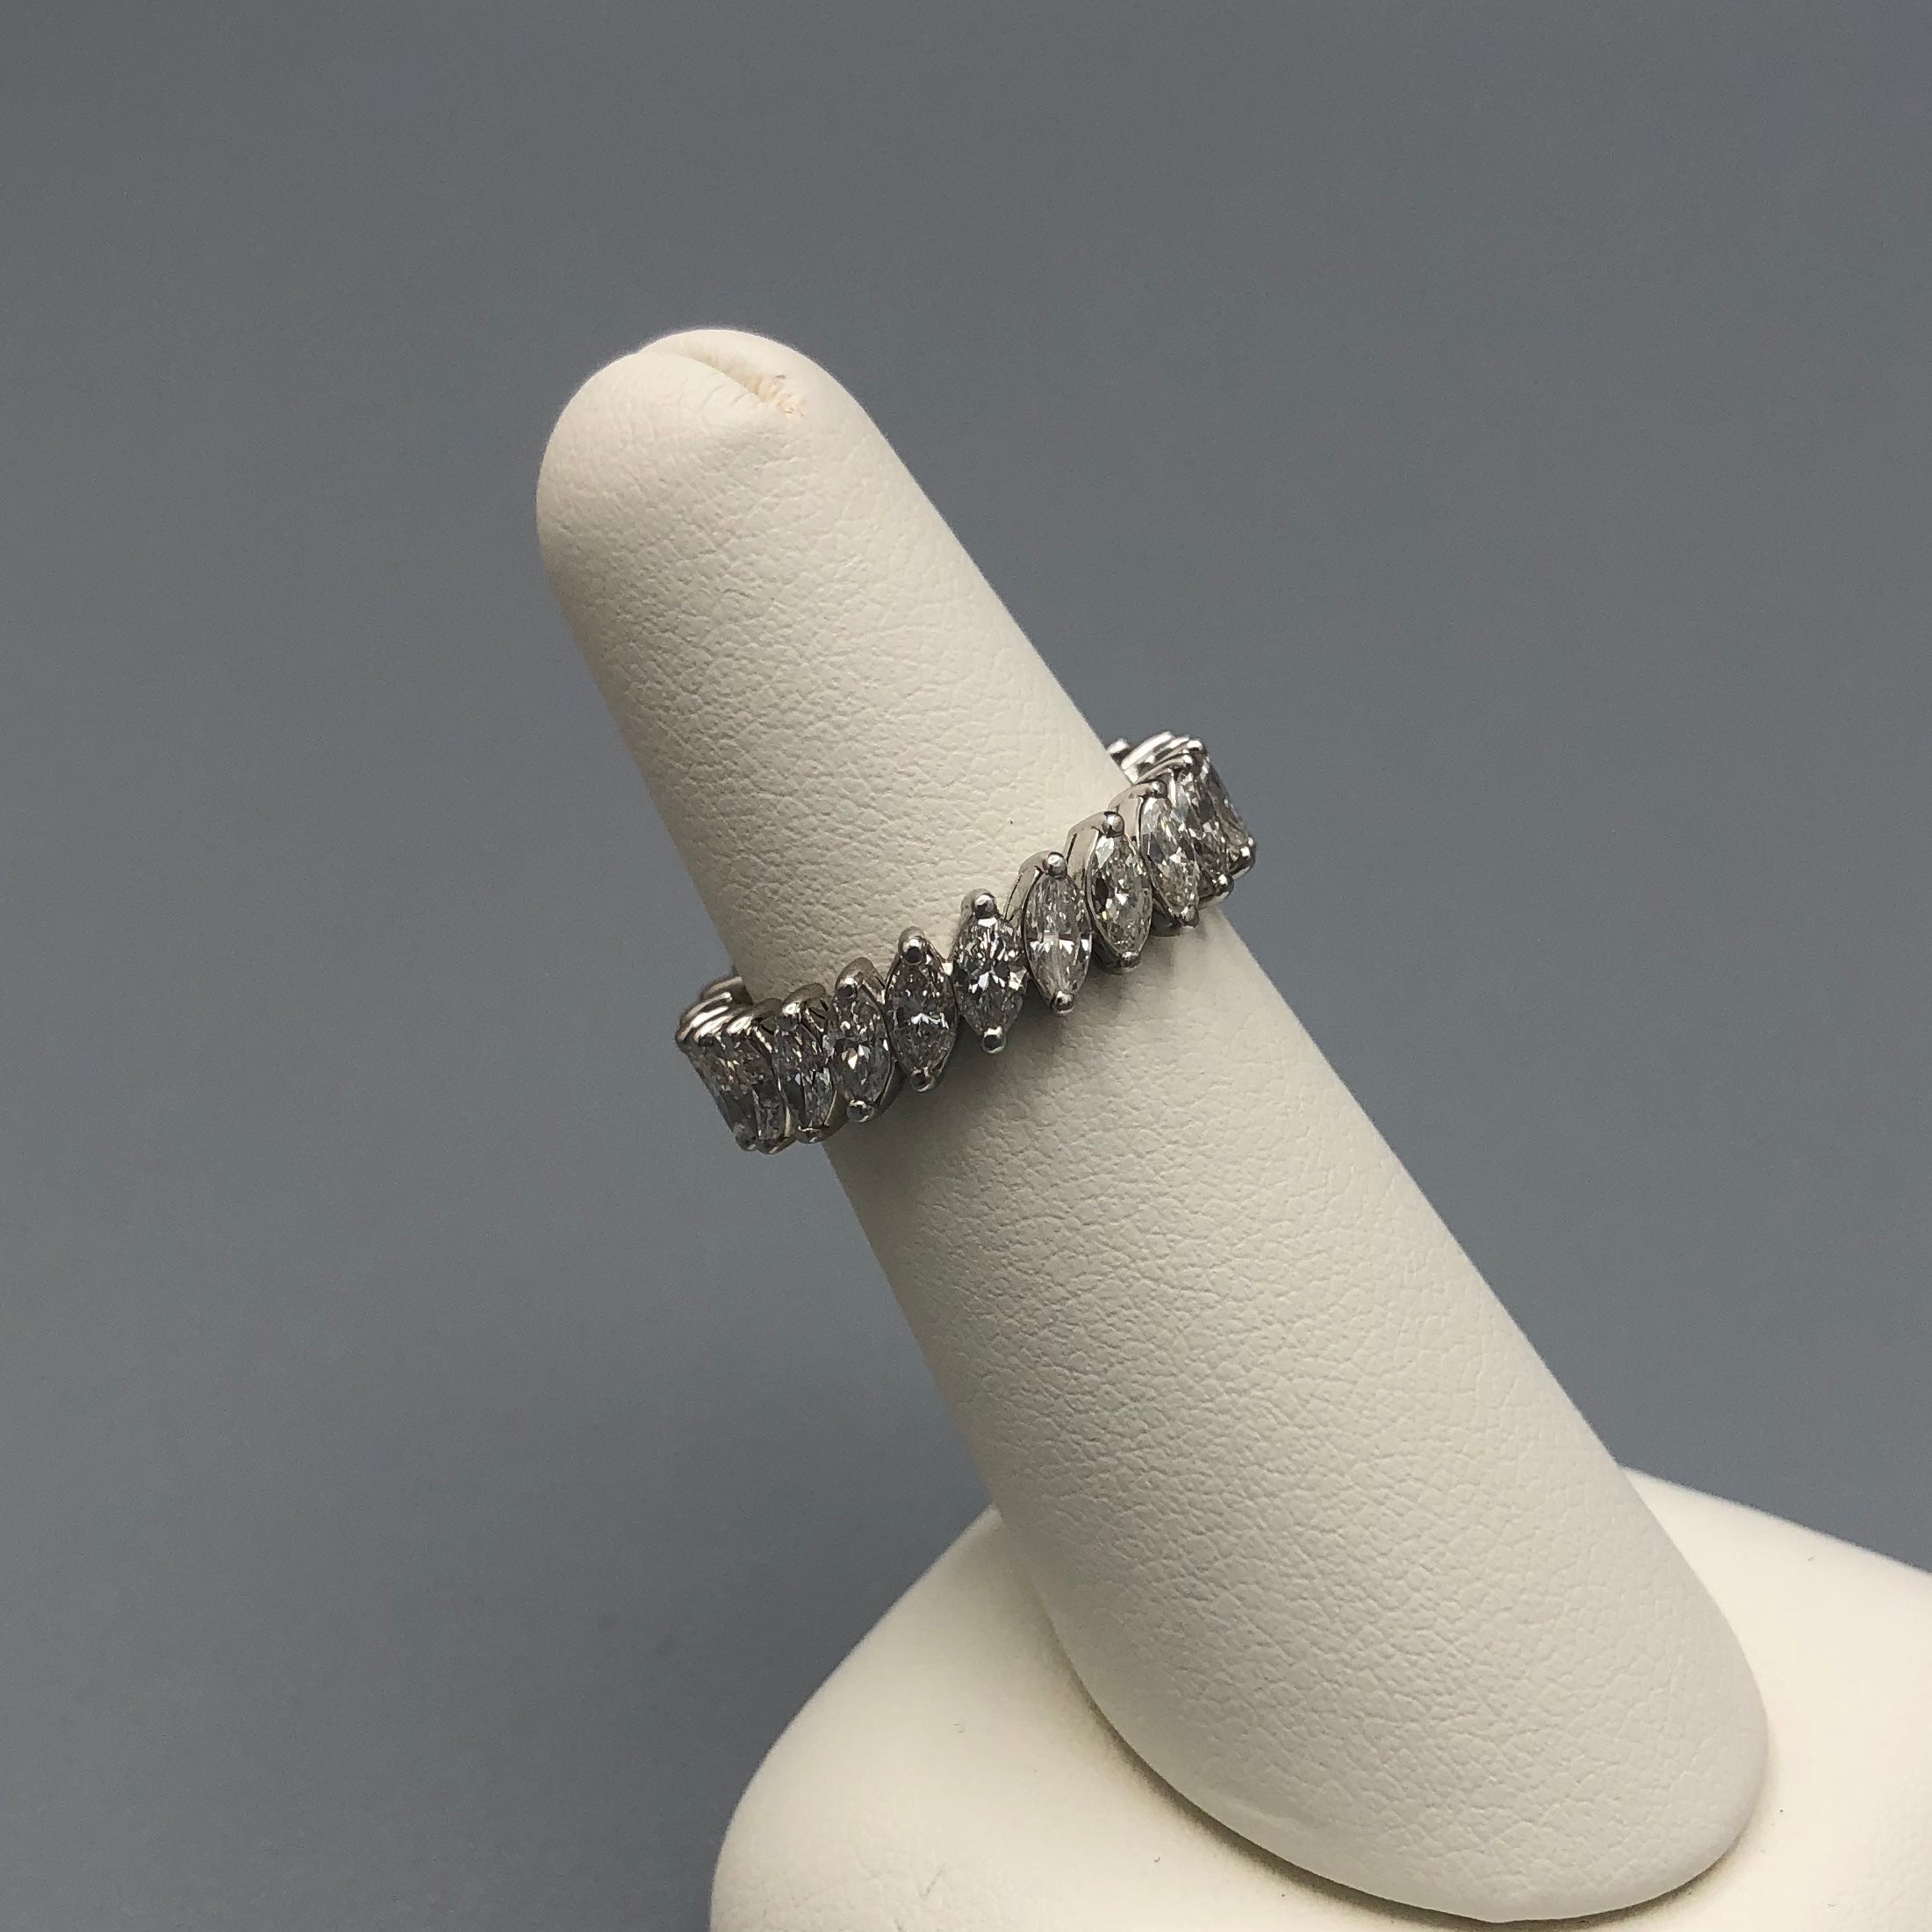 Marquise Cut Diamond Eternity Band with 24 diamonds set in 18k white gold